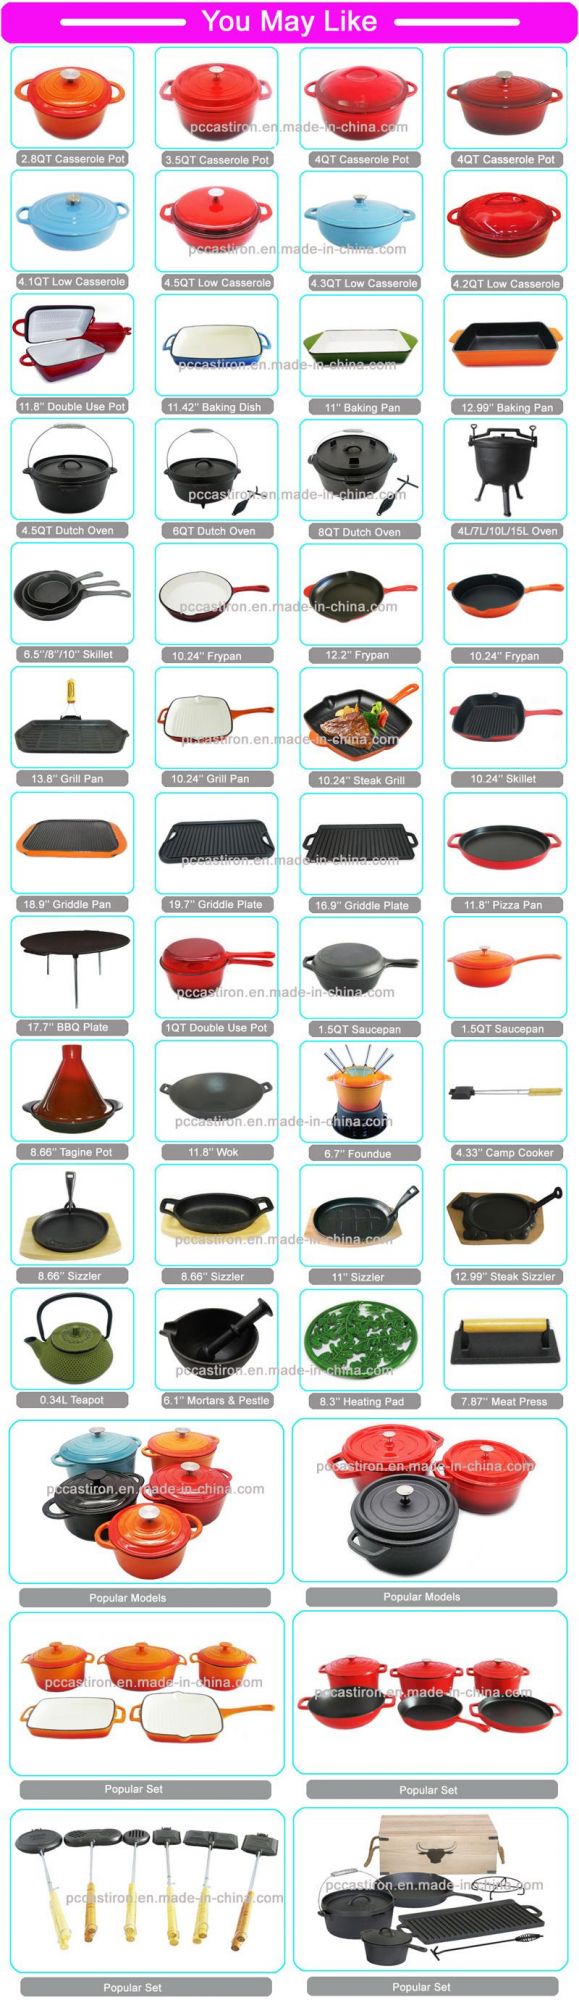 LFGB Approved Marble Mortar and Pestle Manufacturer China